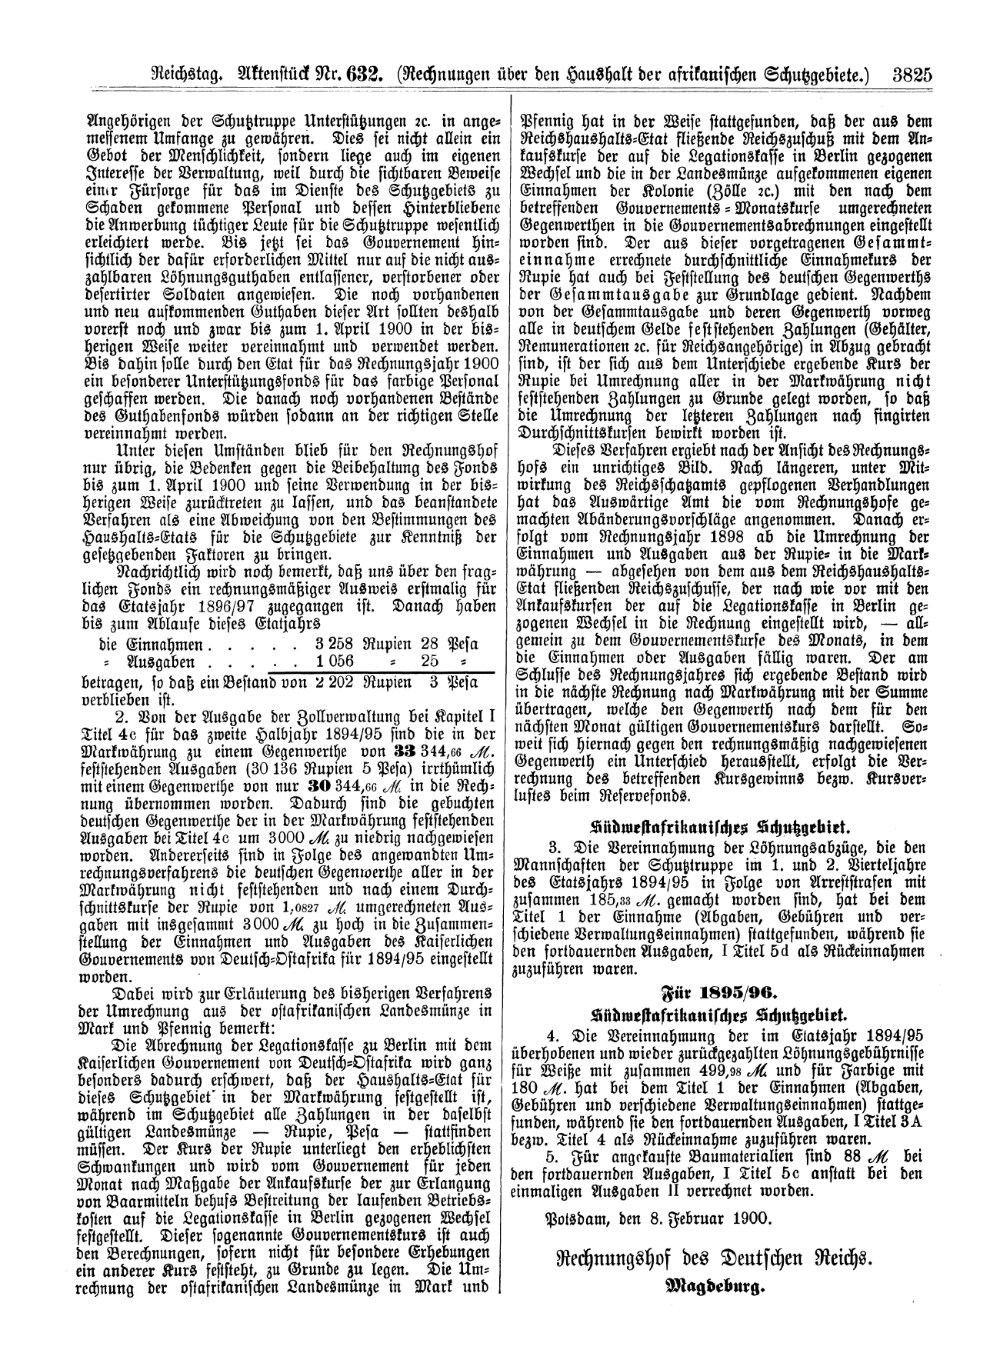 Scan of page 3825